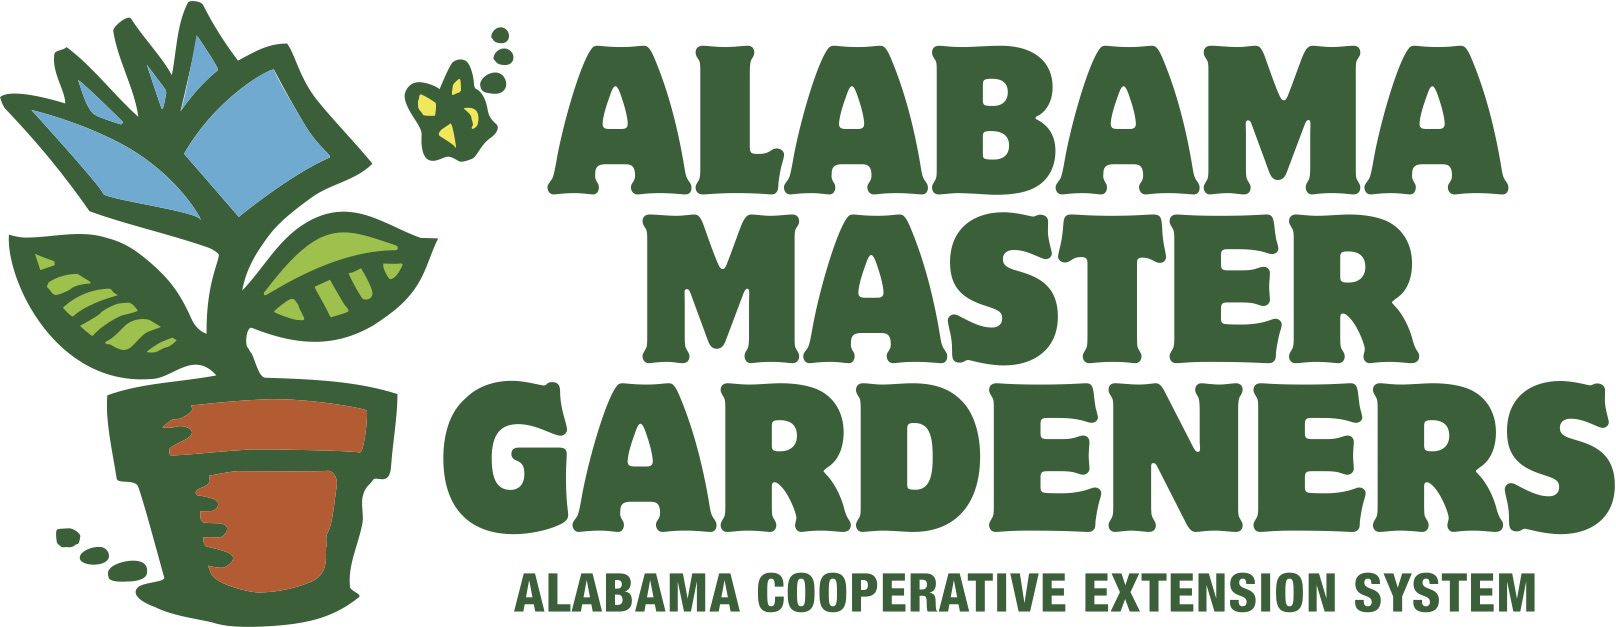 Planting Guide for Home Gardening in Alabama - Alabama Cooperative  Extension System